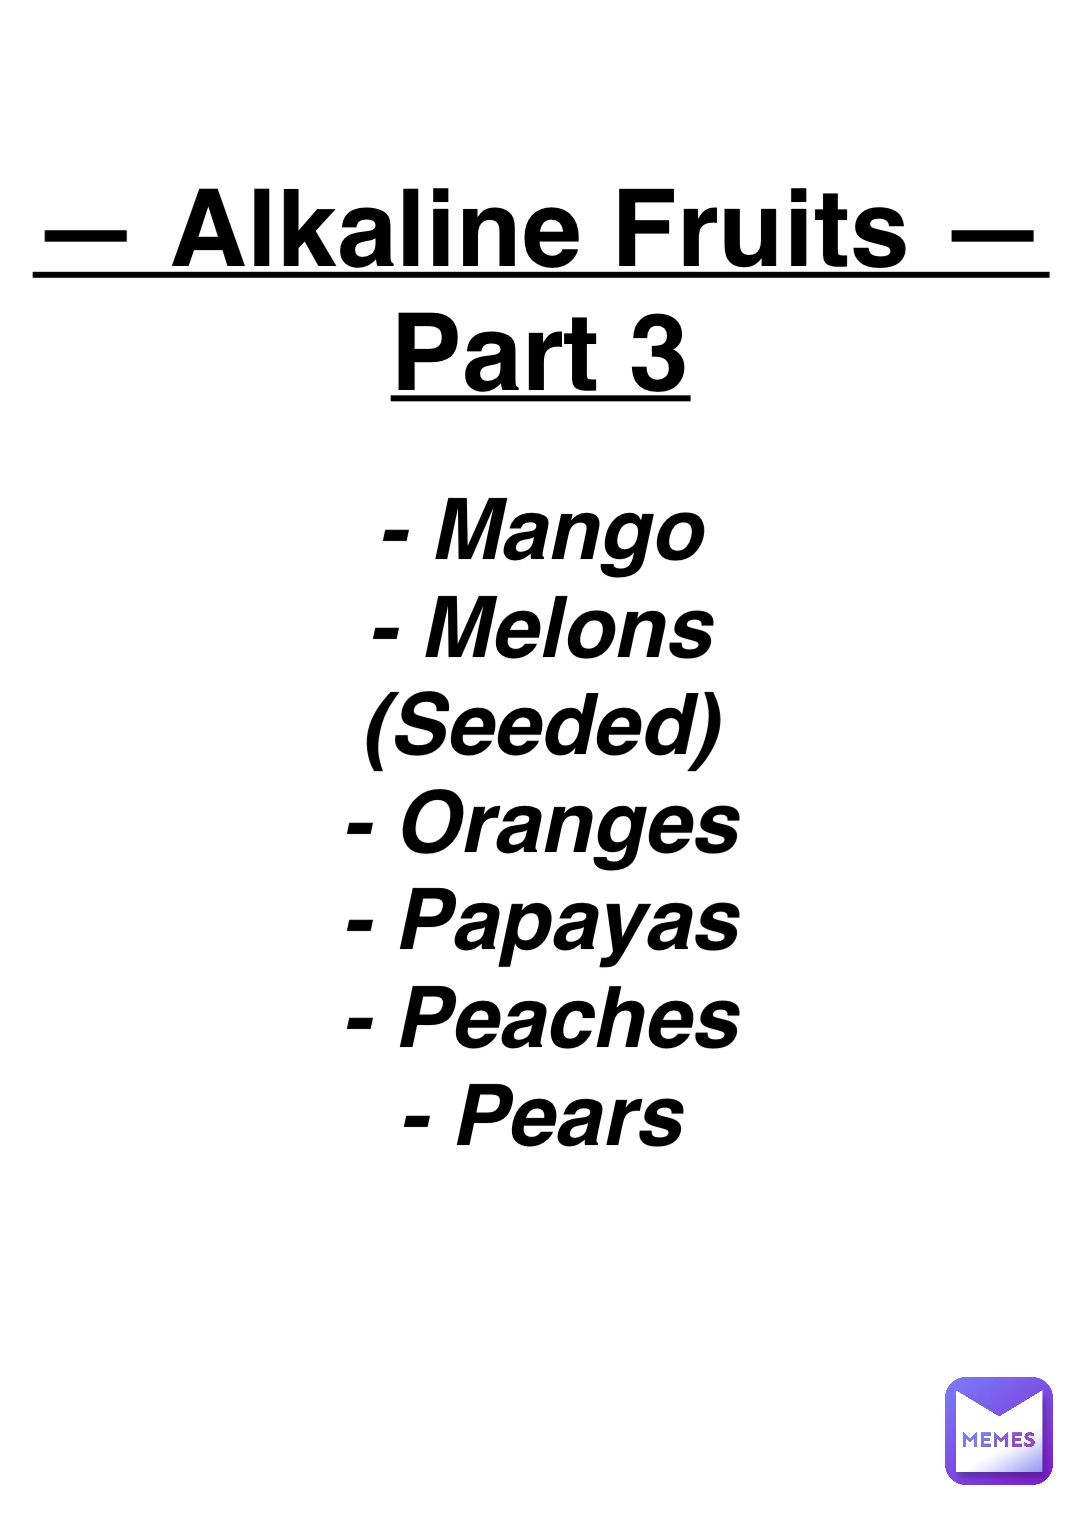 Double tap to edit — Alkaline Fruits —
Part 3 - Mango
- Melons
(Seeded)
- Oranges
- Papayas
- Peaches
- Pears